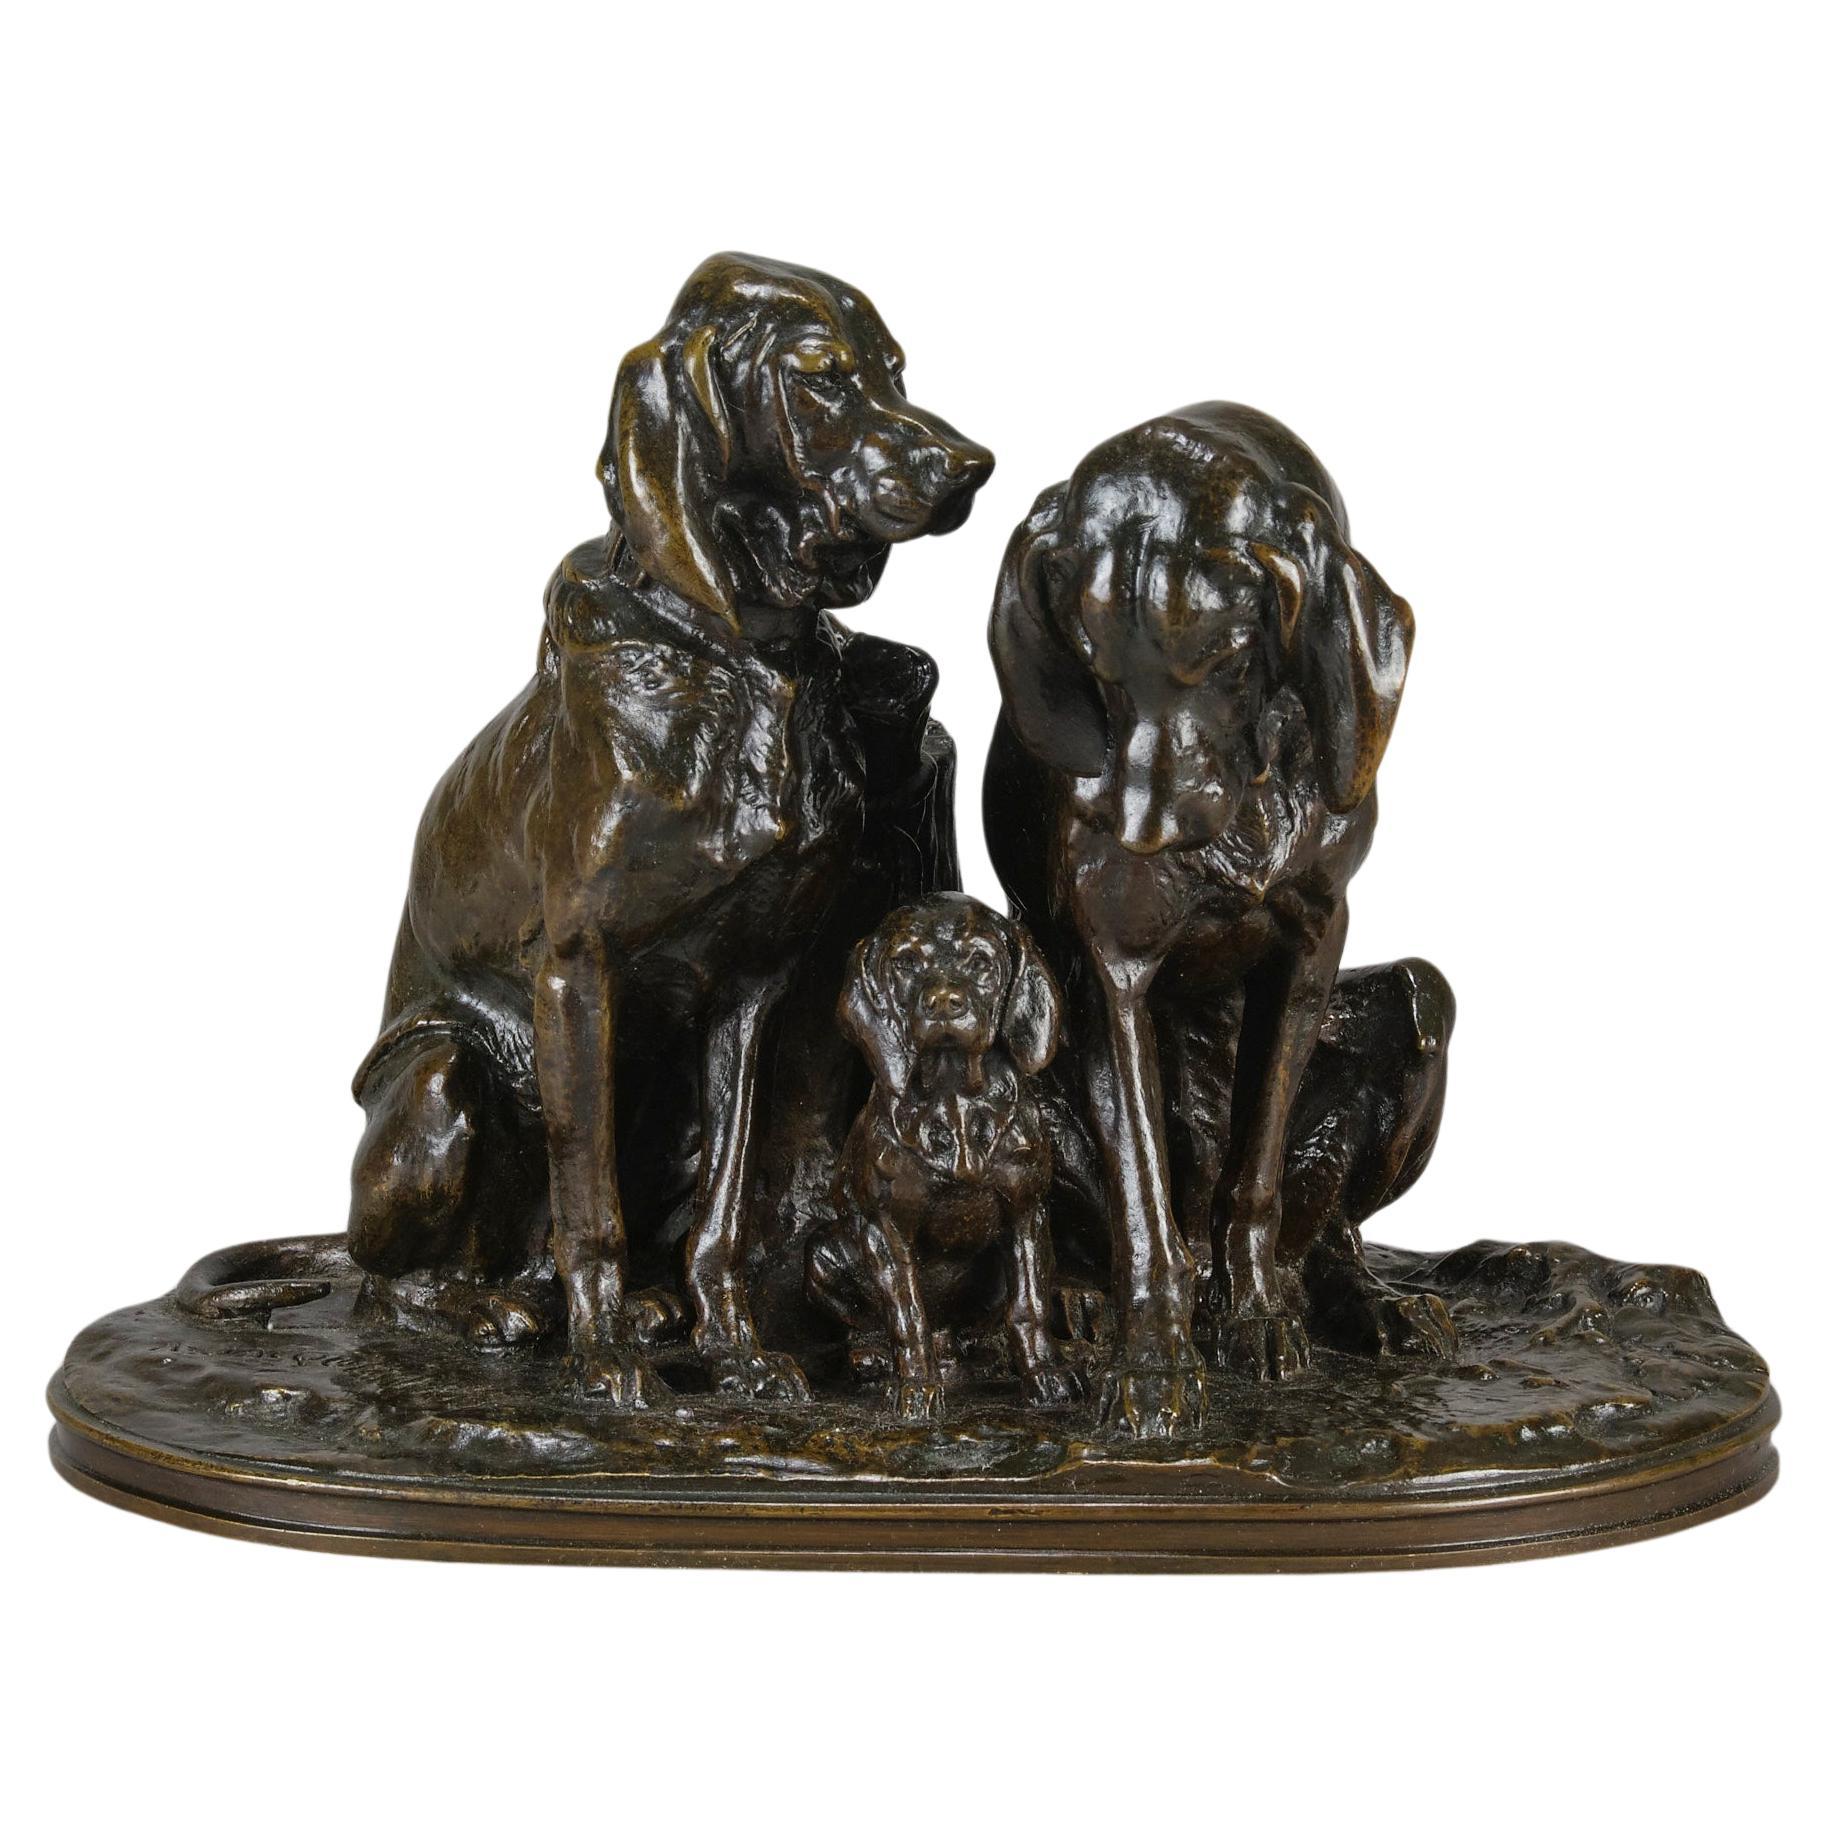 Late 19th Century Animalier Bronze entitled "Hound Family" by Alfred Jacquement For Sale